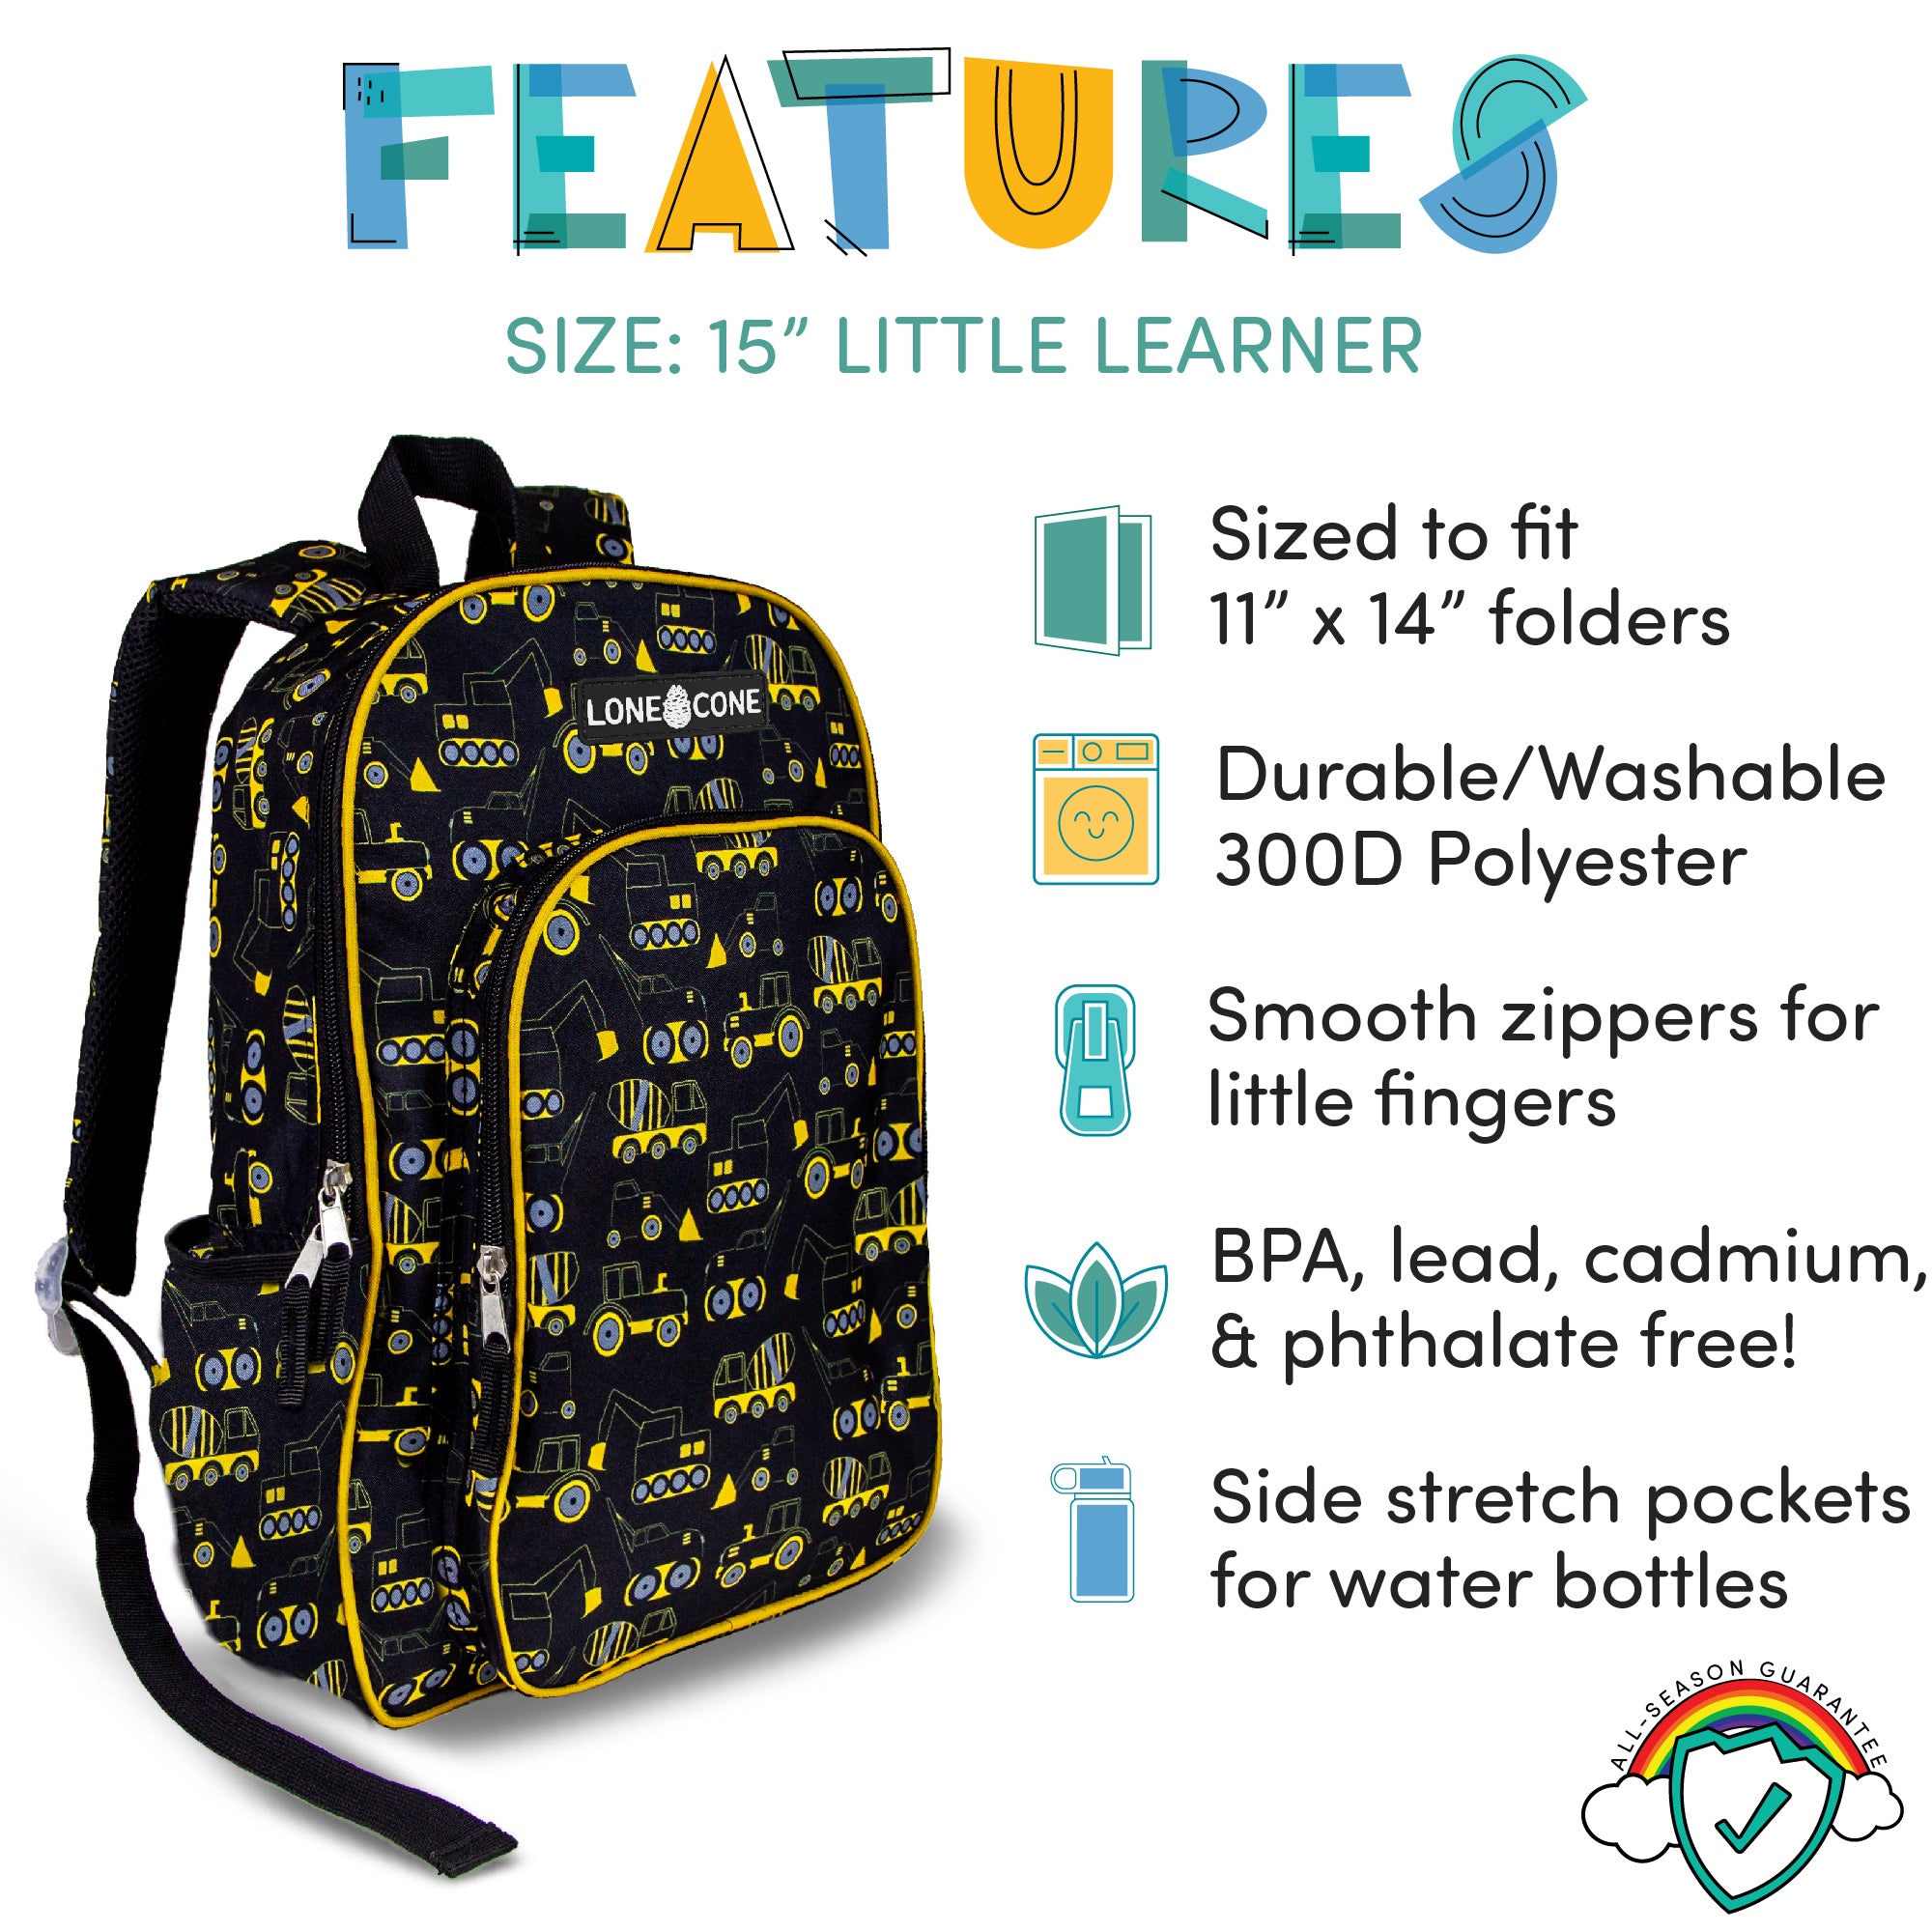 Construction Zone 15" Backpack